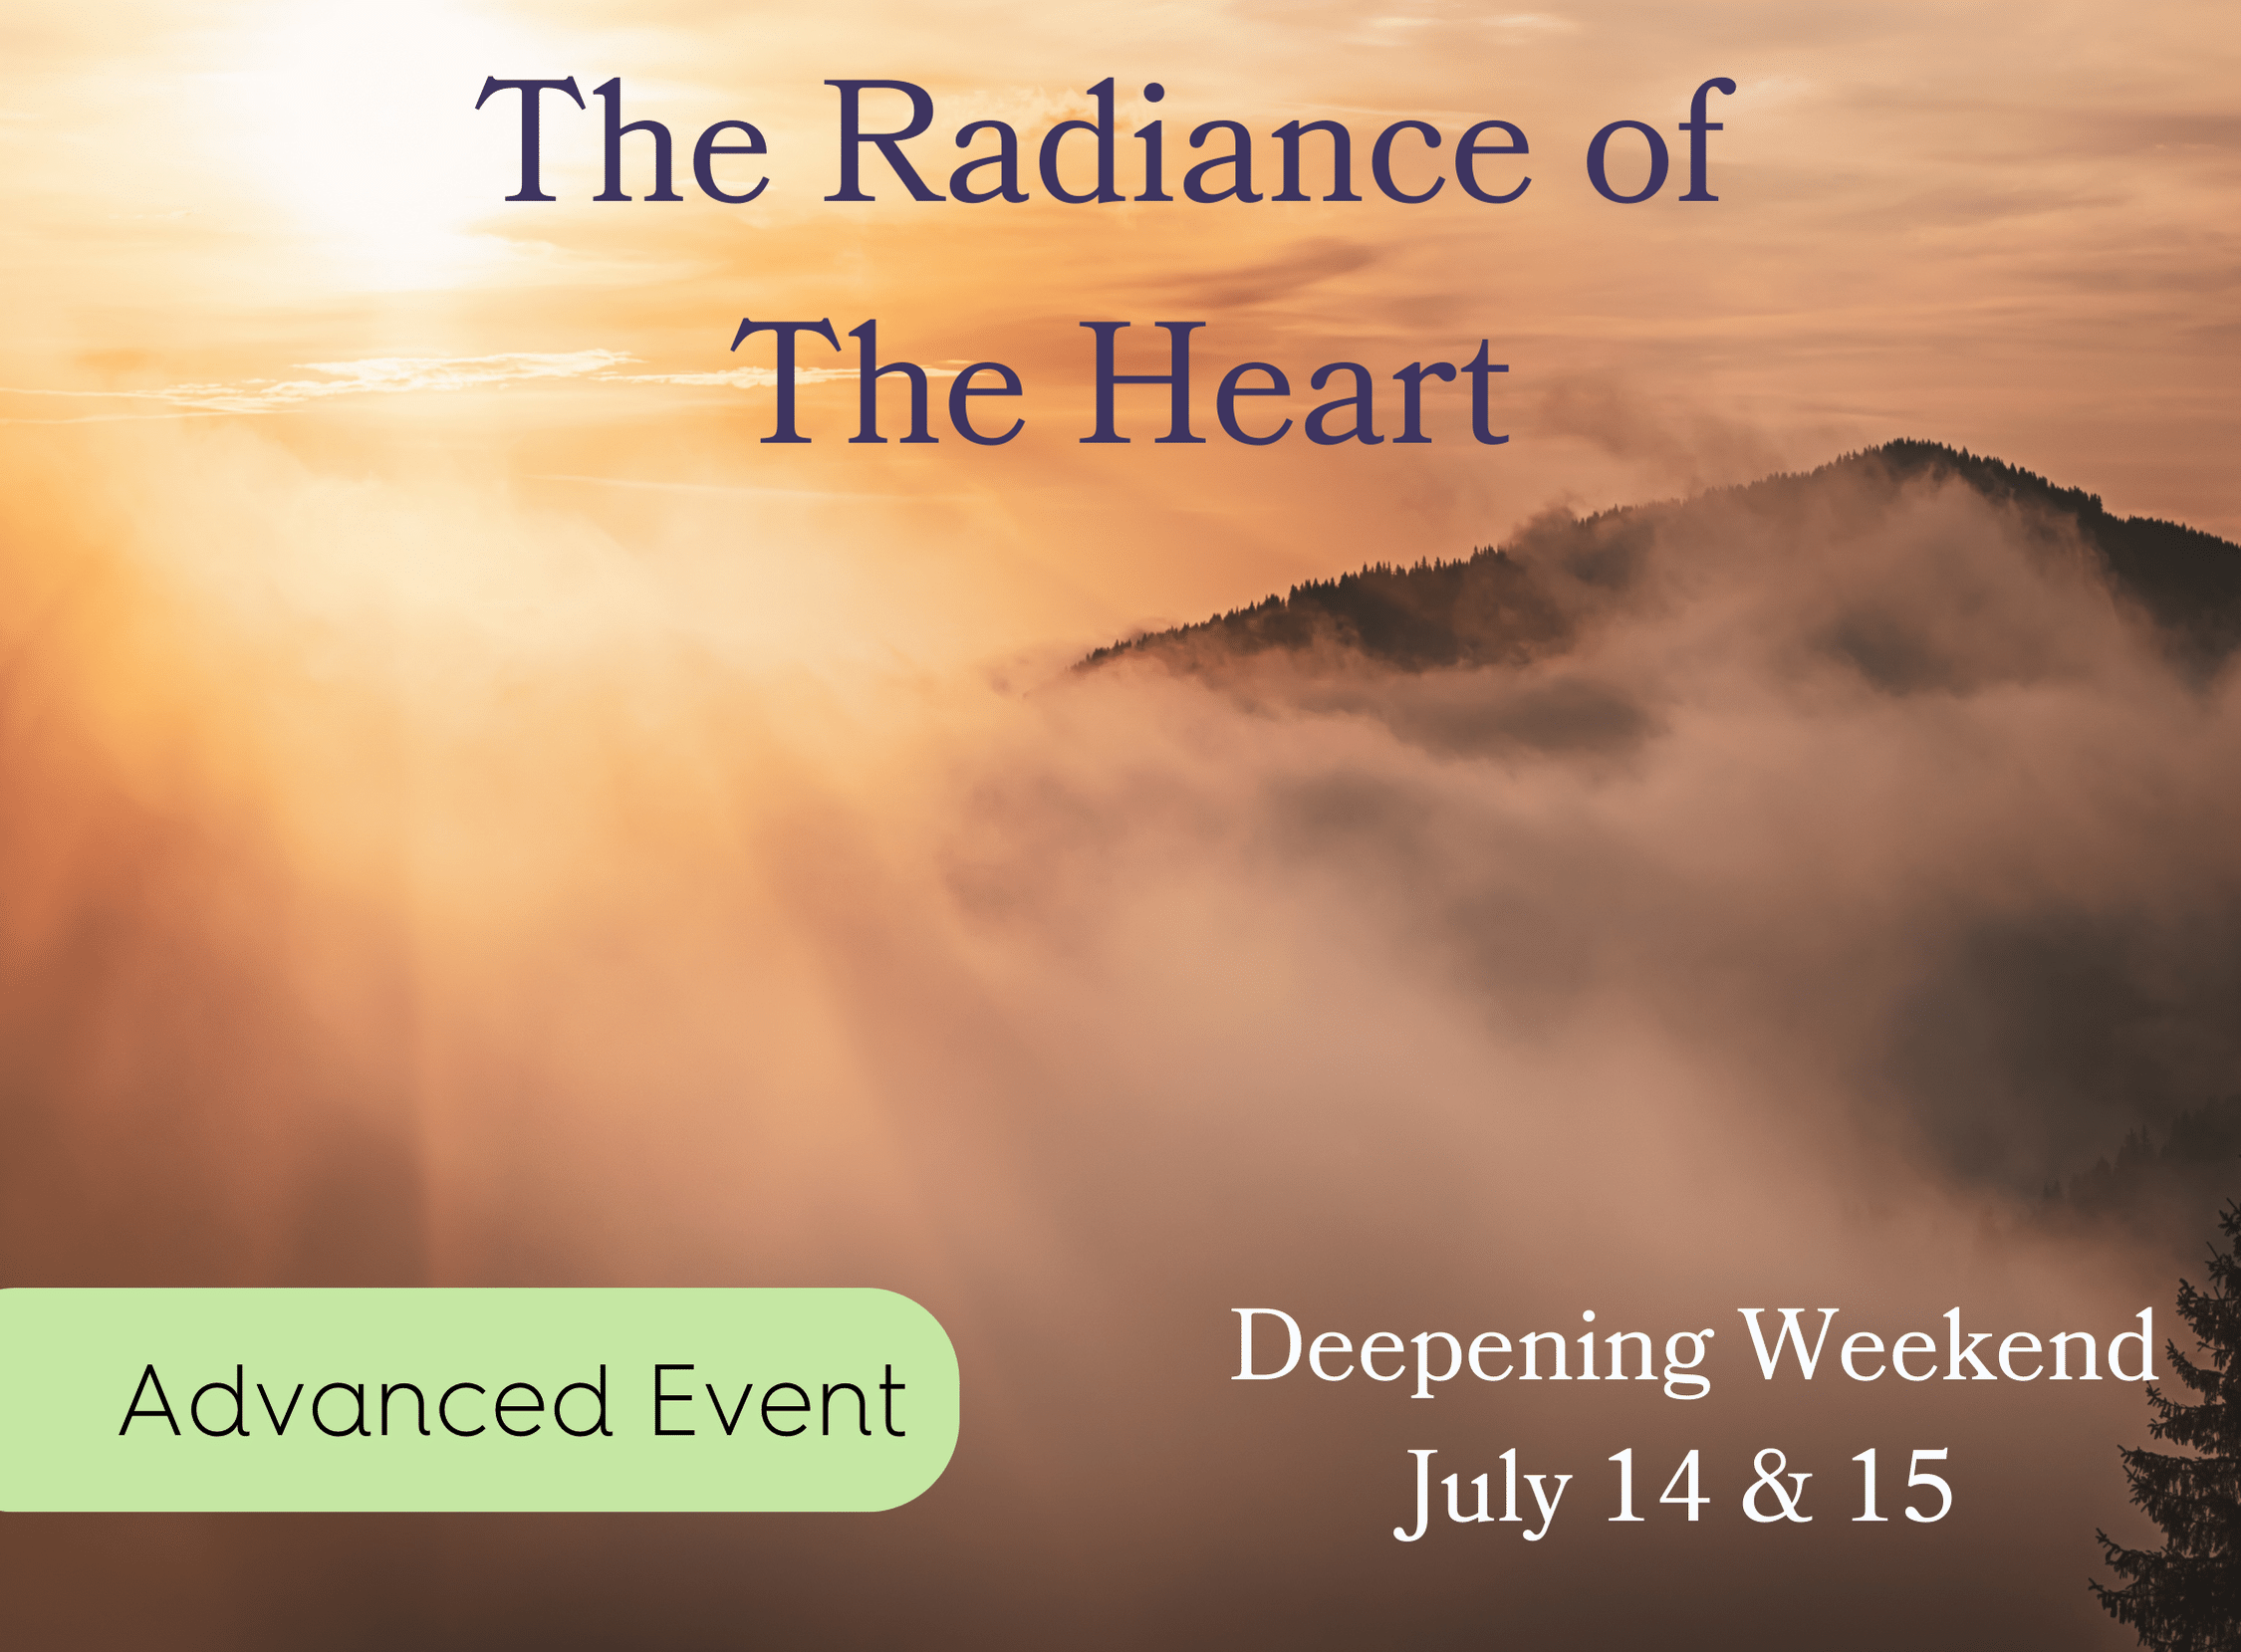 The Radiance of the Heart Deepening Weekend